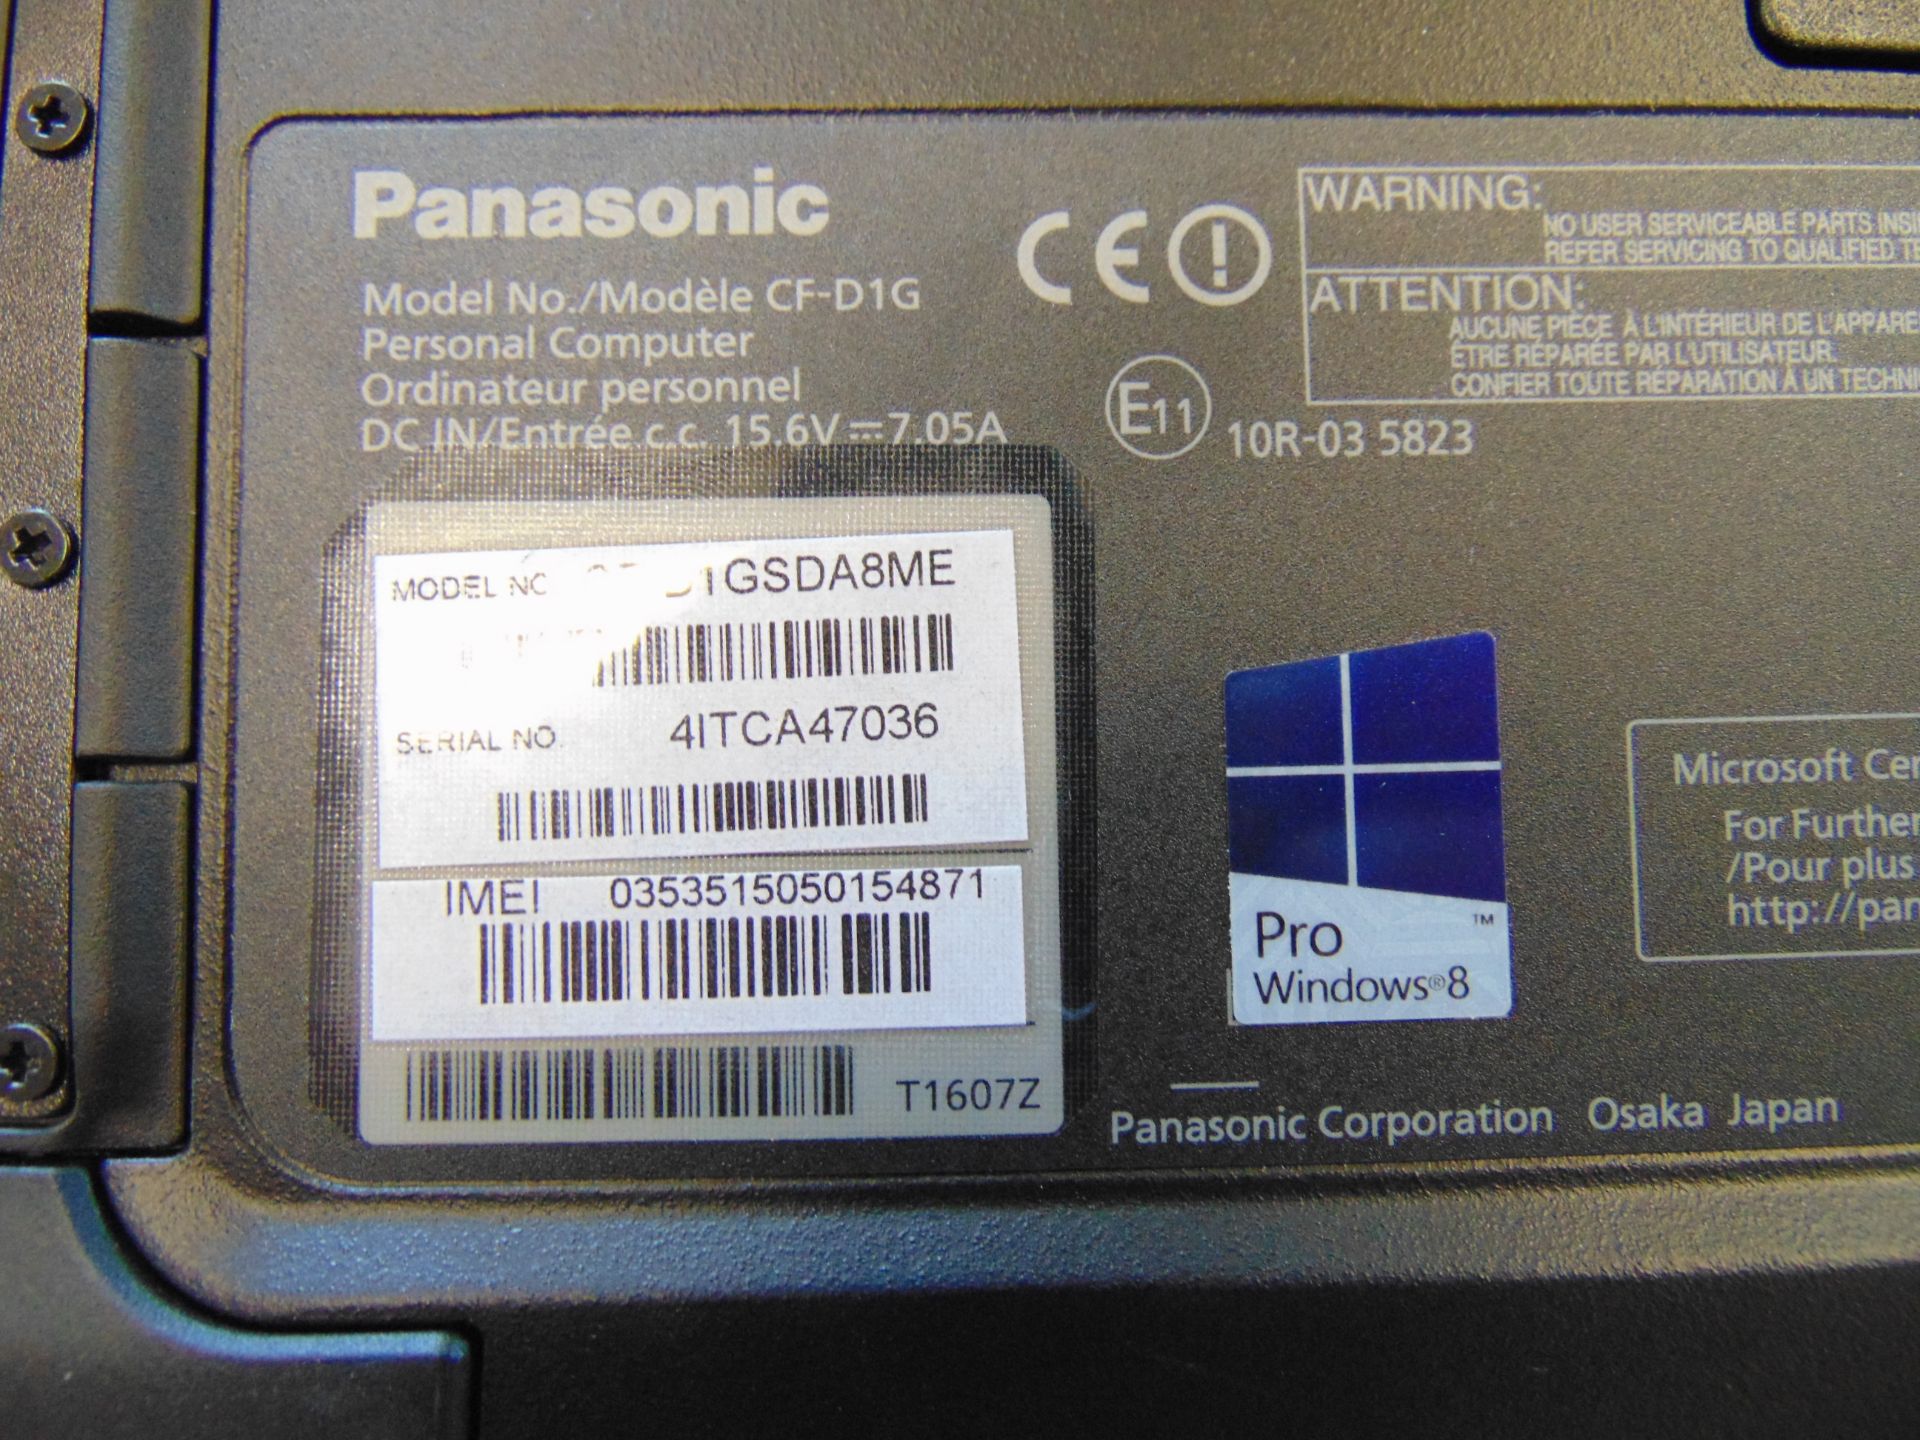 Panasonic Toughbook / Toughpad CF-D1 i5 Rugged Tablet - Image 6 of 6